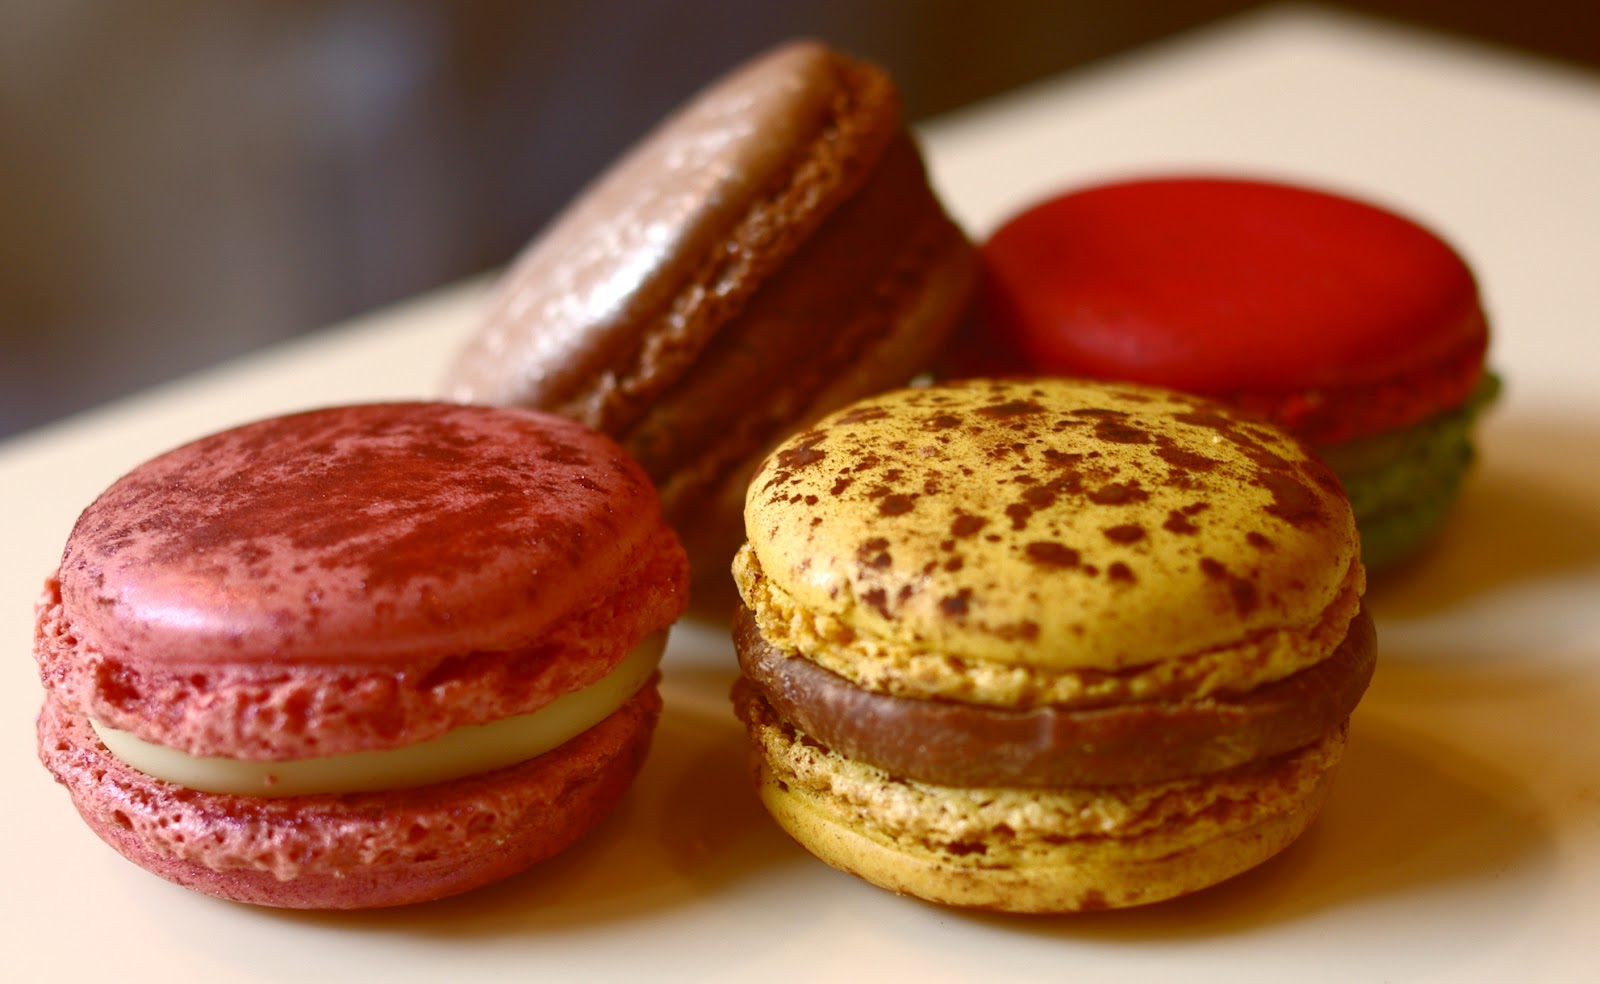 What Lucy Ate Next: Pierre Herme Macaron